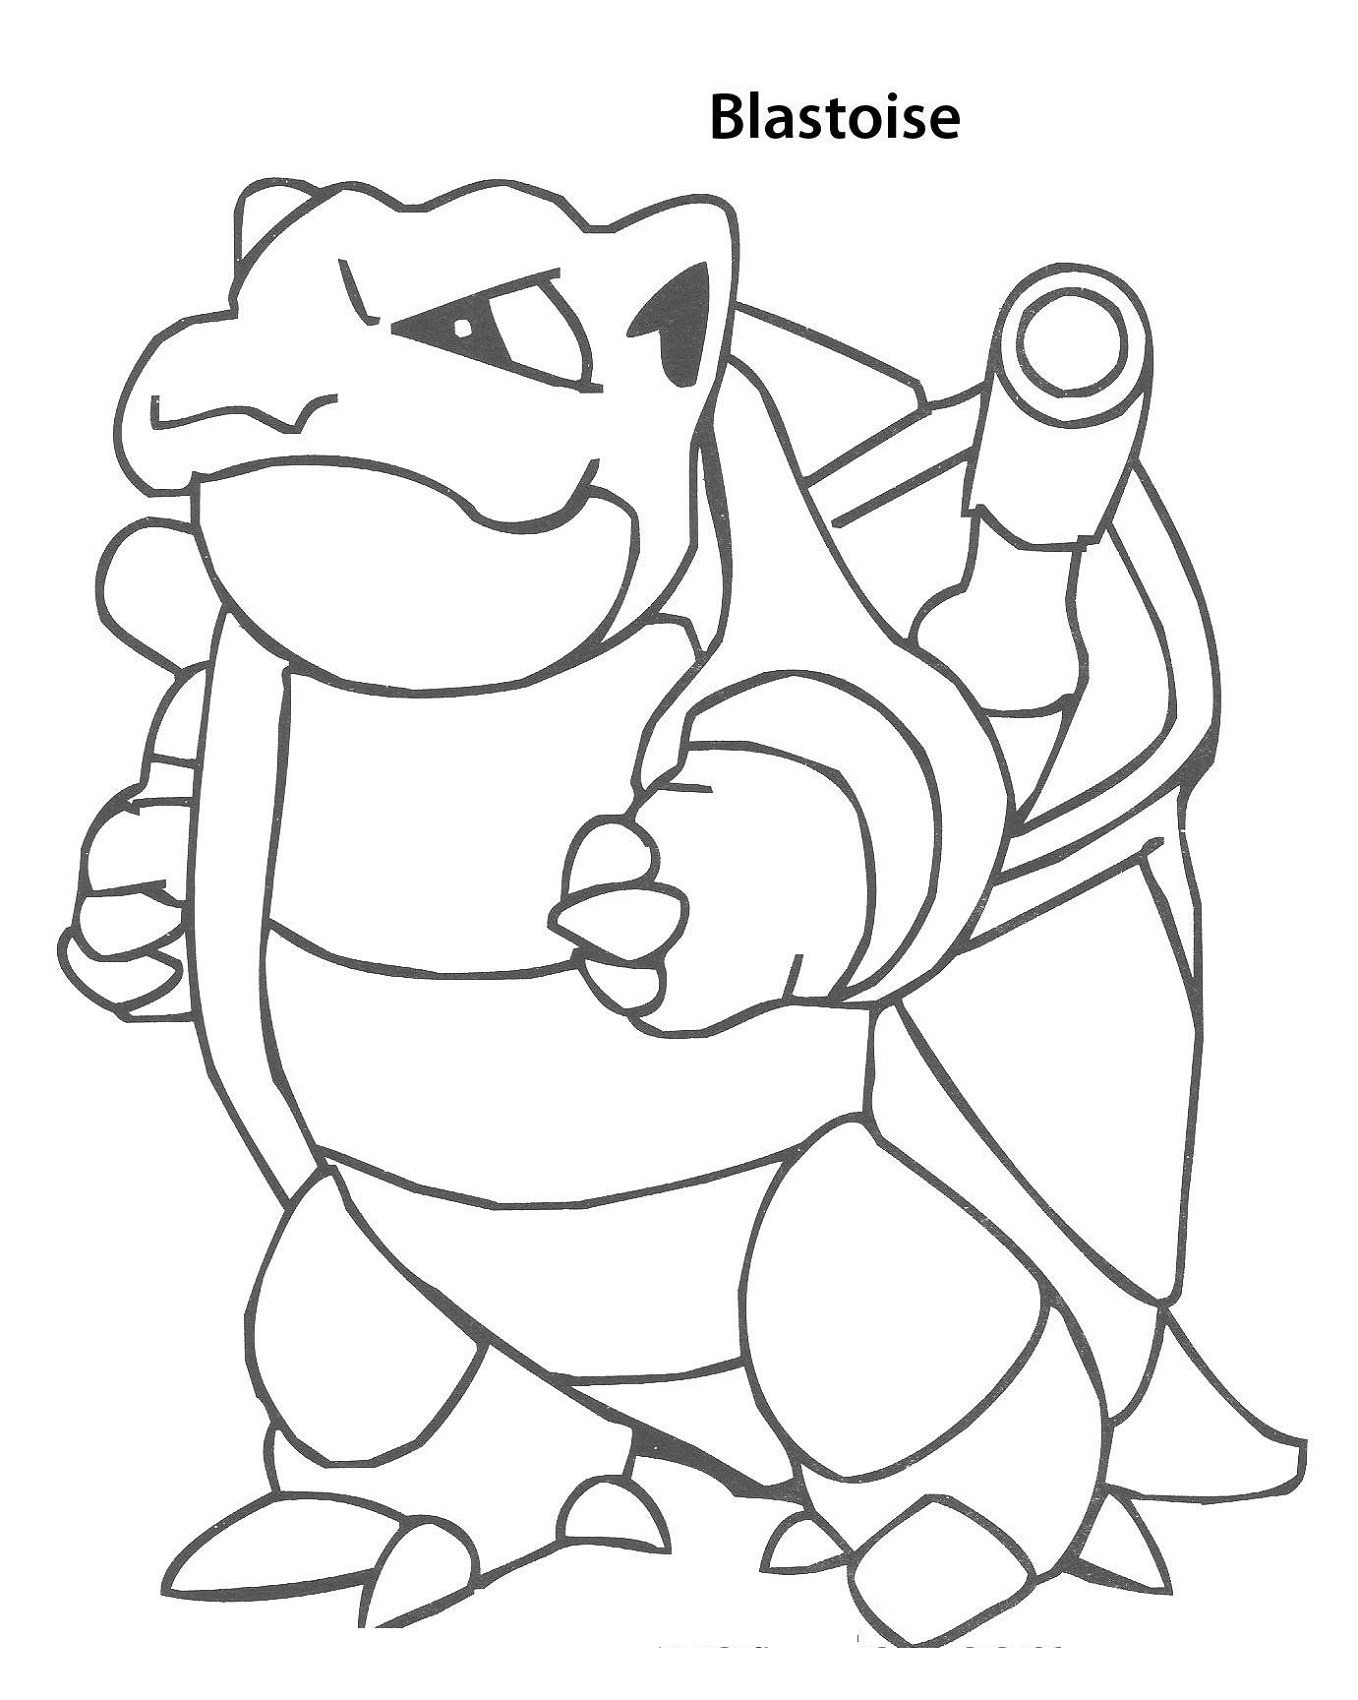 Blastoise Coloring Page Free